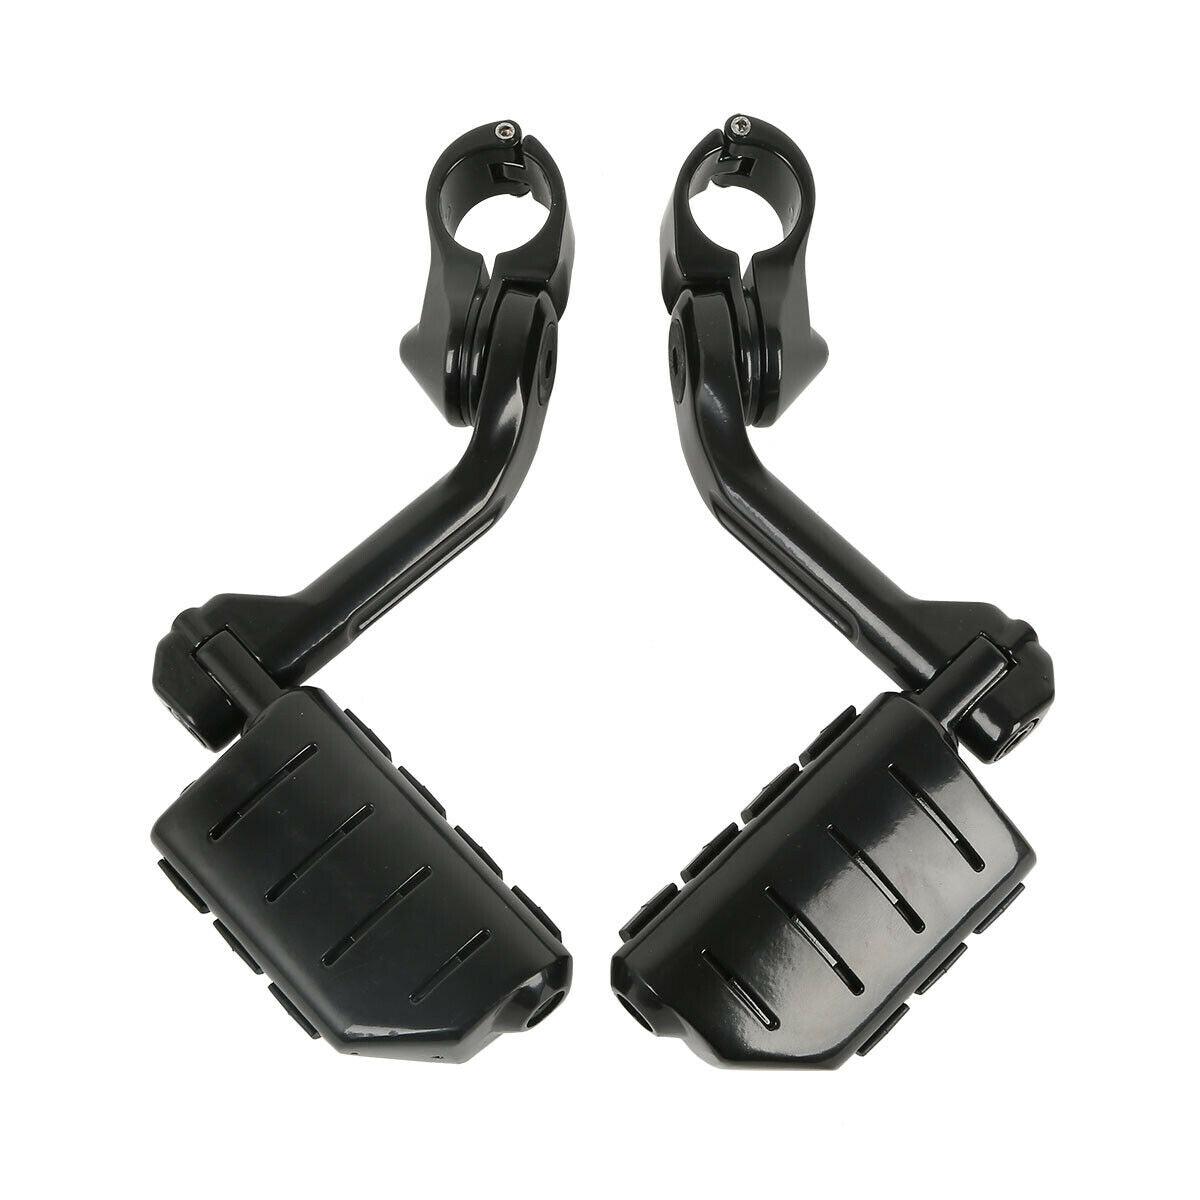 1-1/4" Black Highway Engine Guard Long Angled Foot Pegs Mount For Harley Touring - Moto Life Products